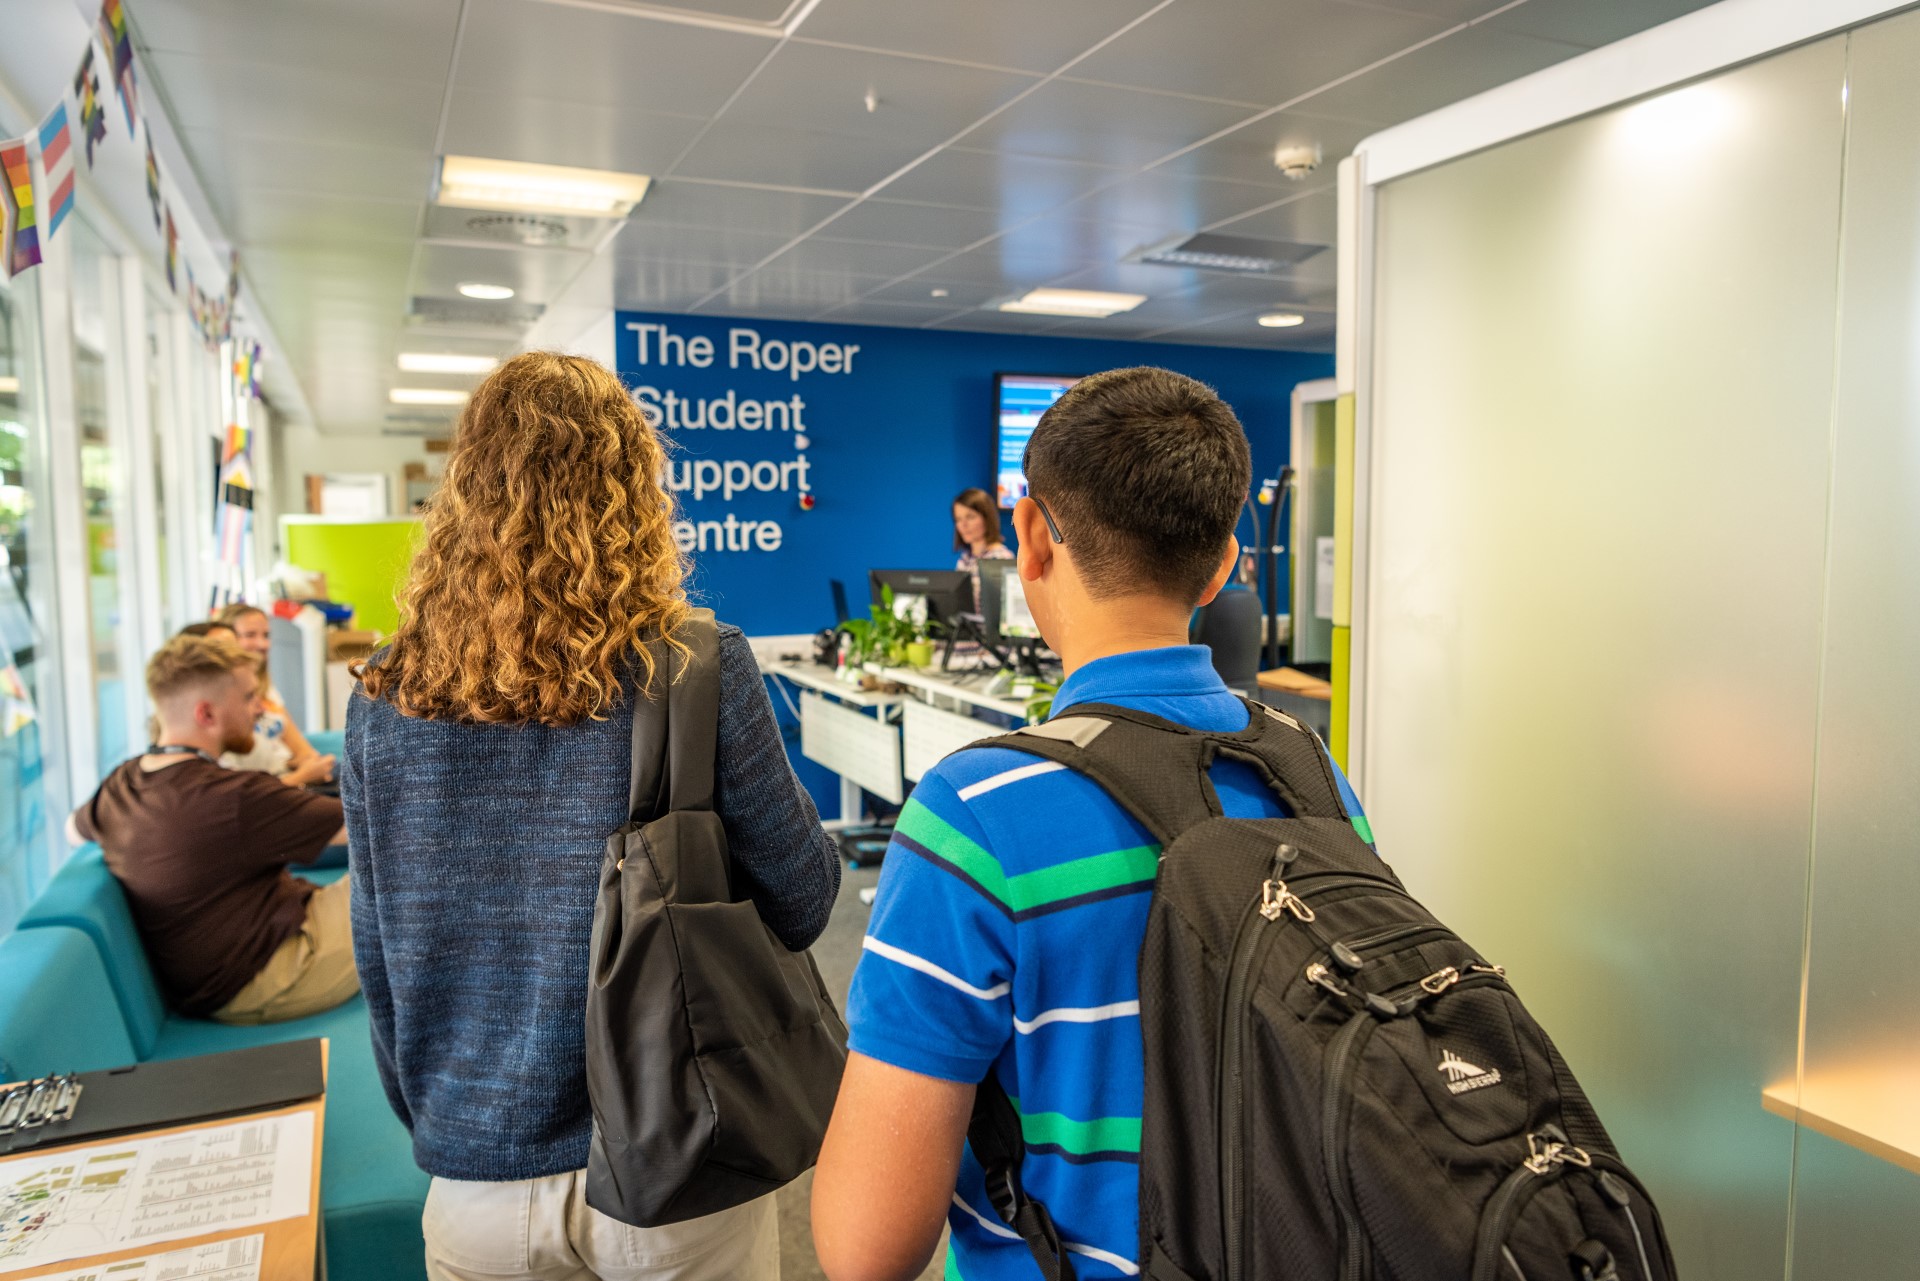 Students at the Roper Student Support Centre on campus